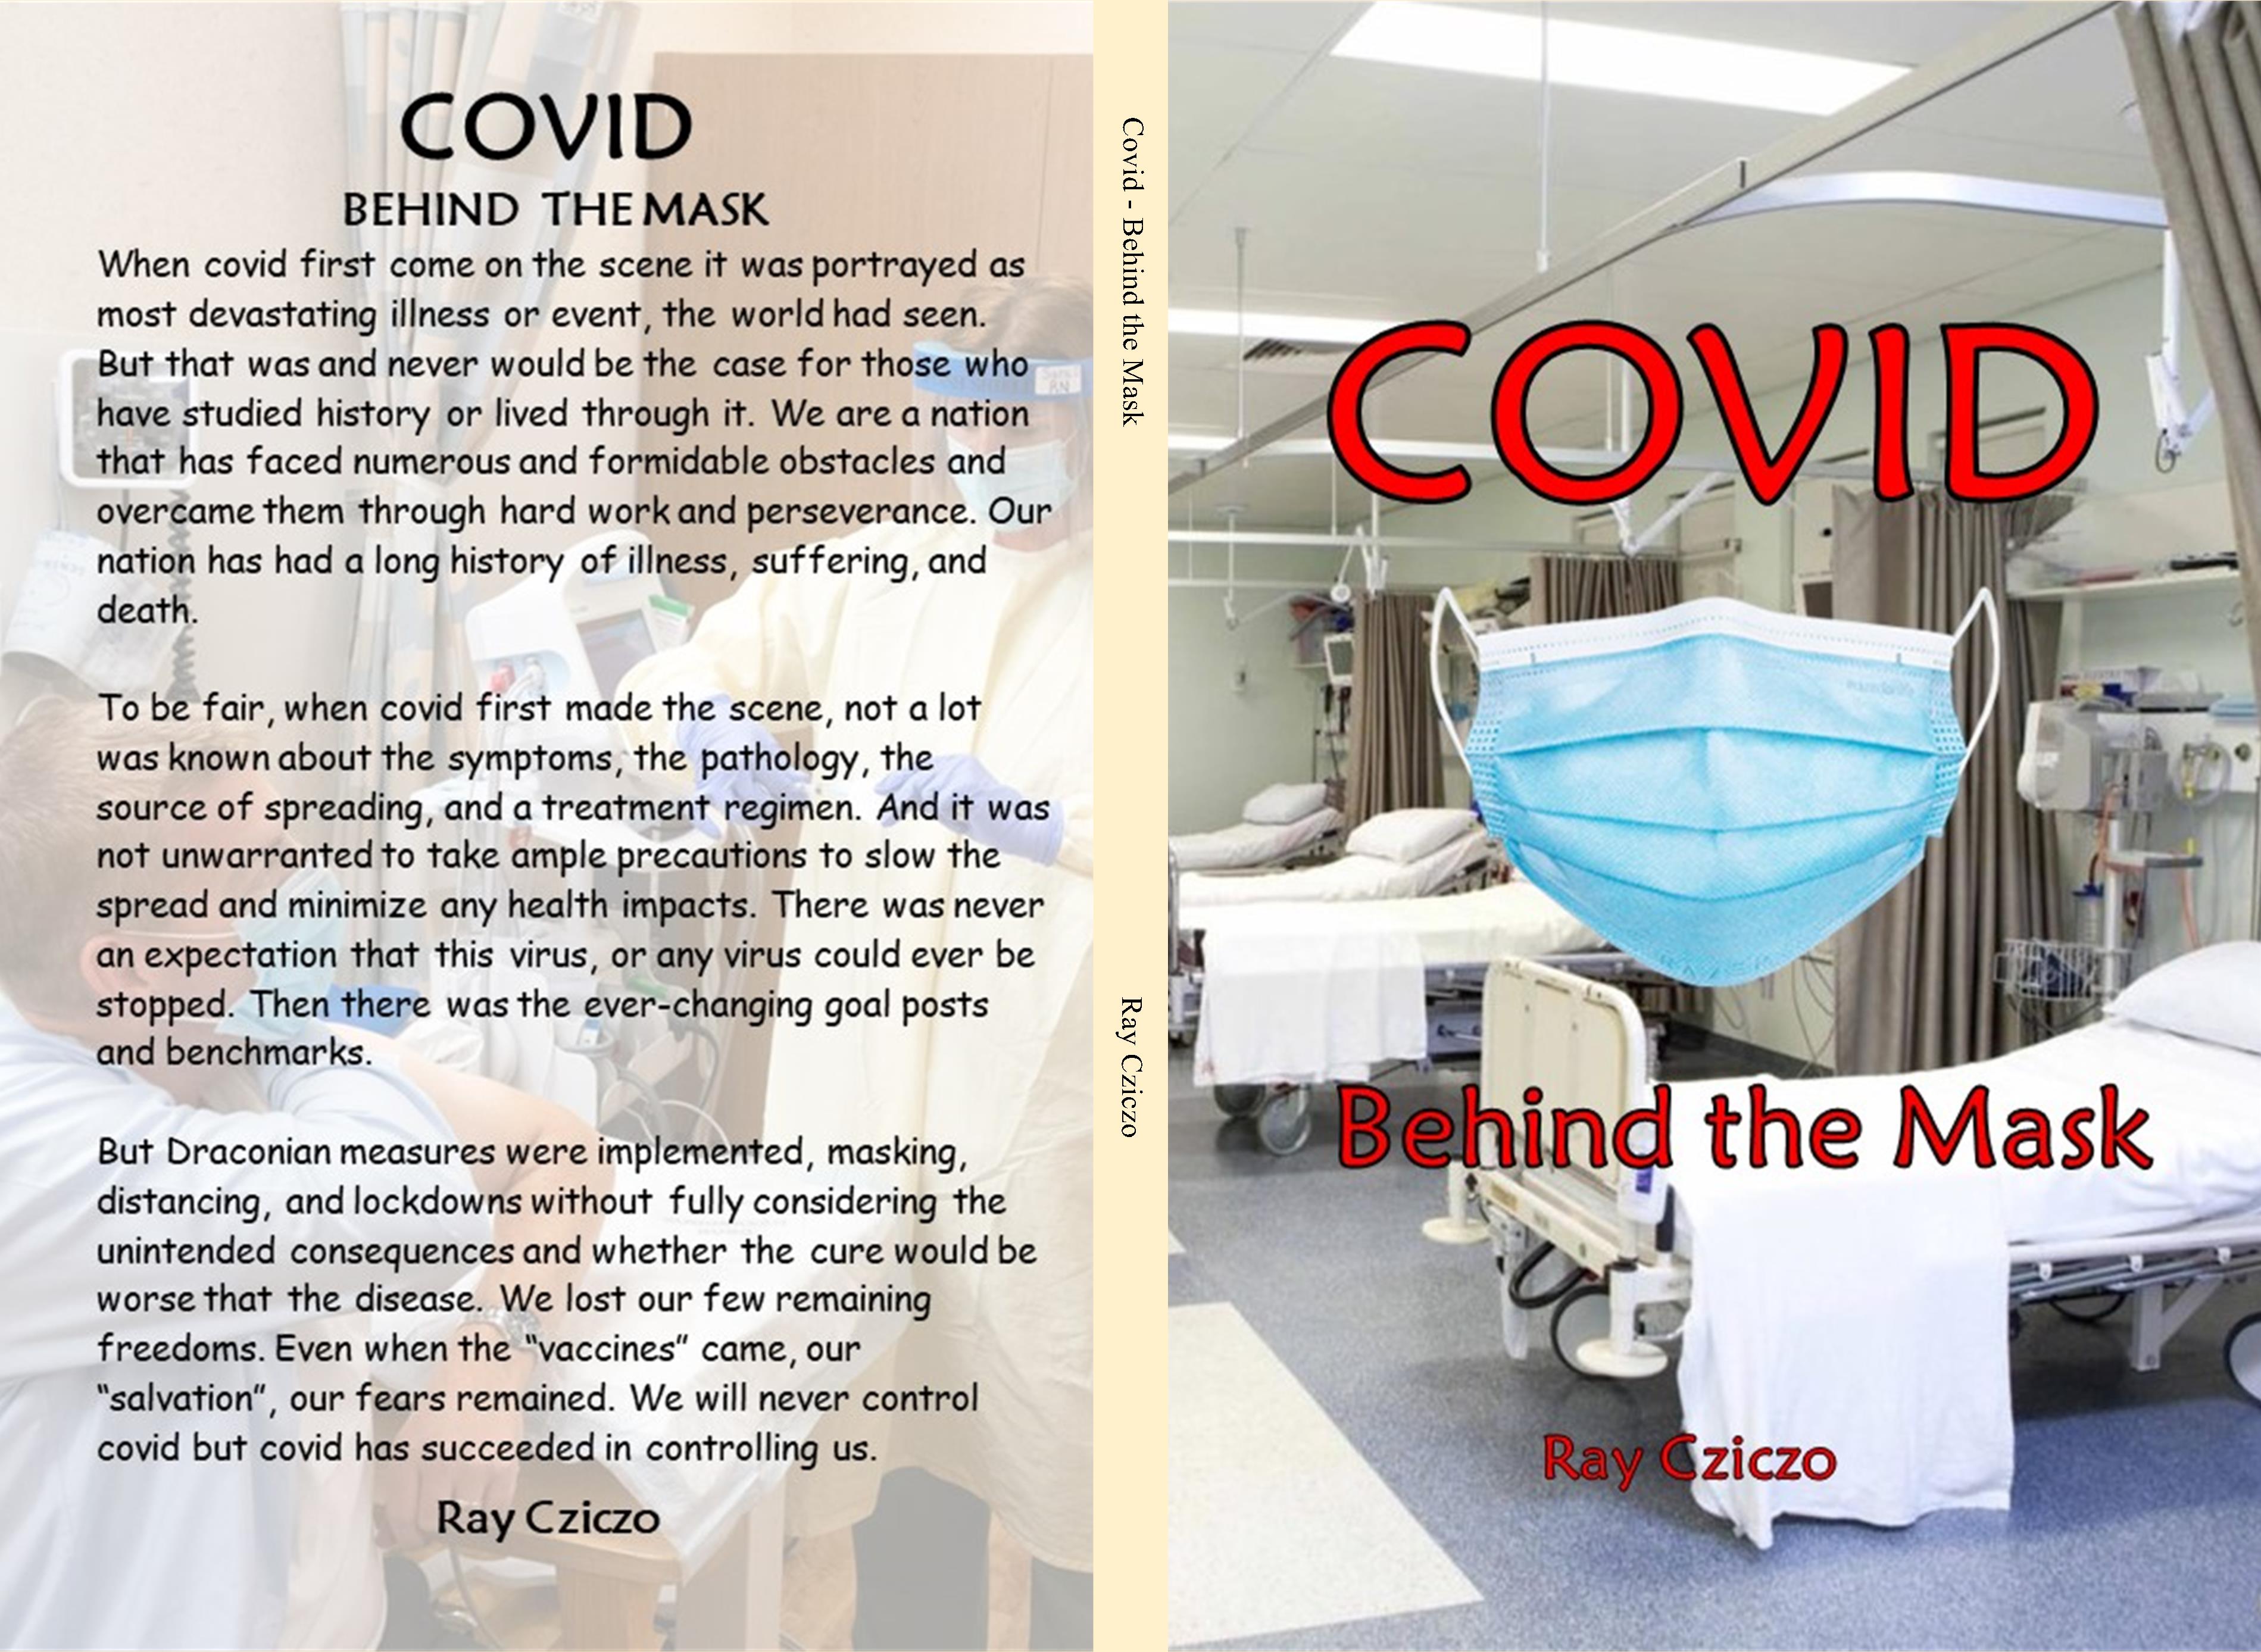 Covid - Behind the Mask cover image